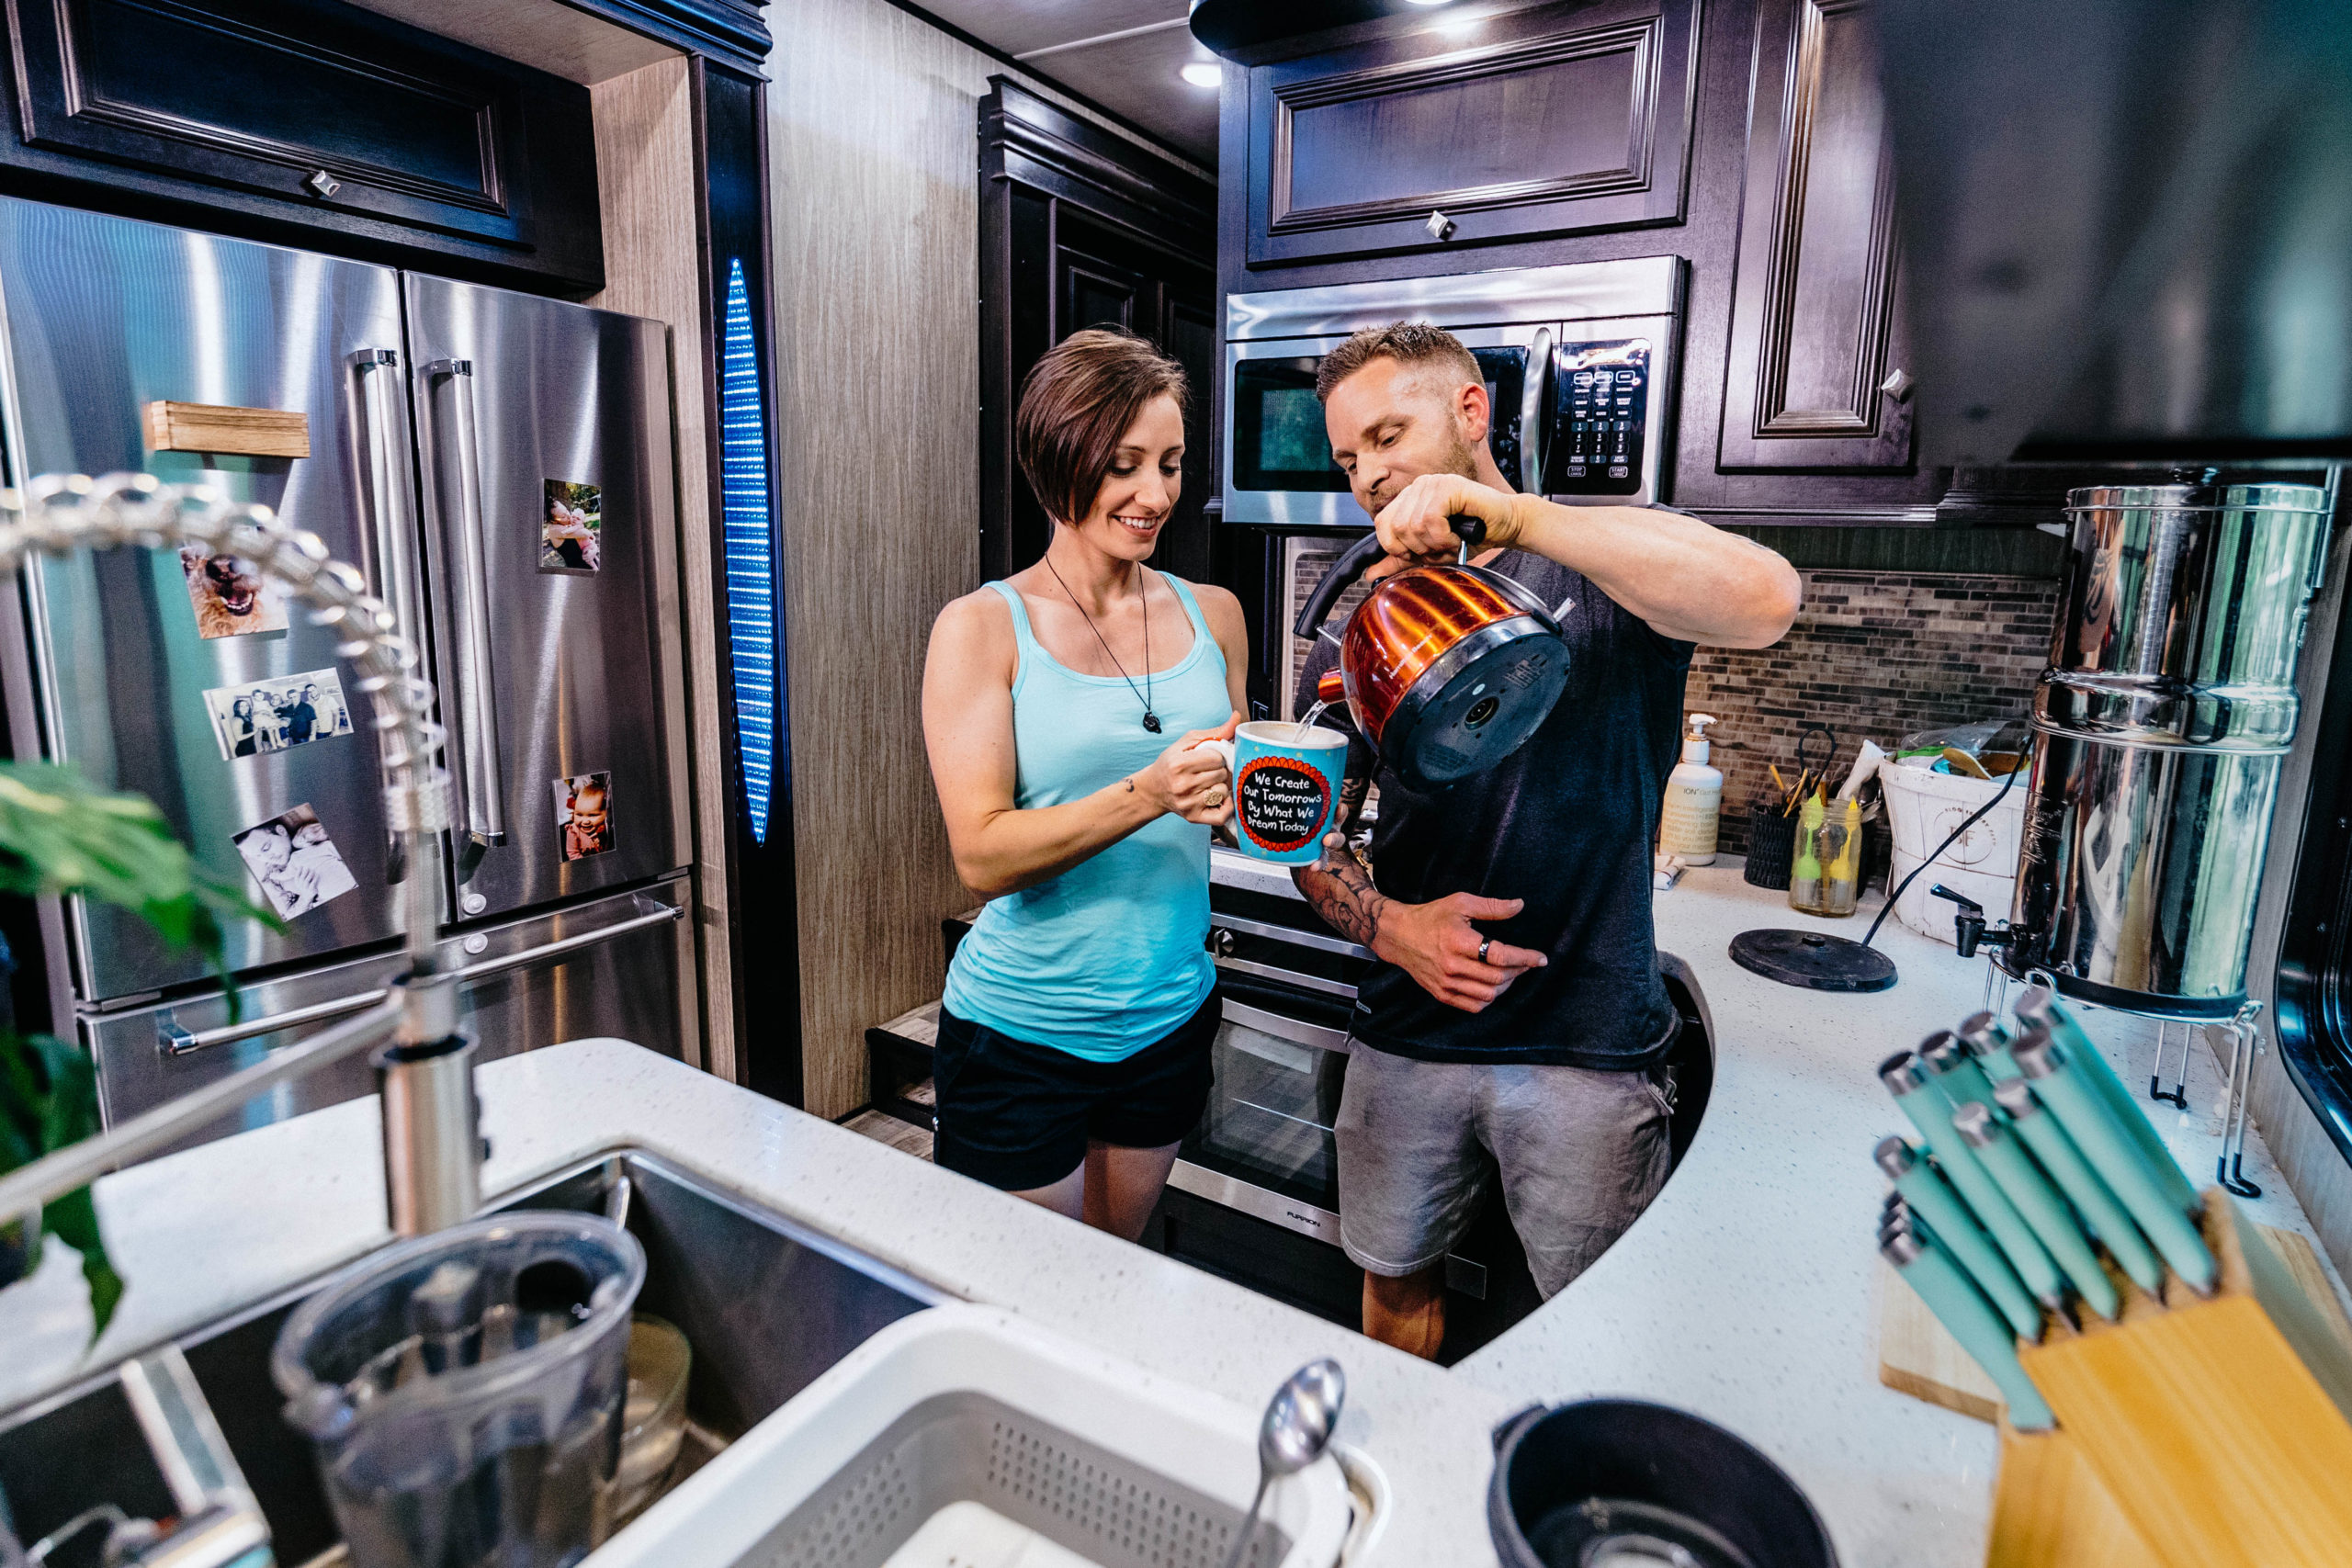 Two fit adults pouring coffee inside an RV kitchen.